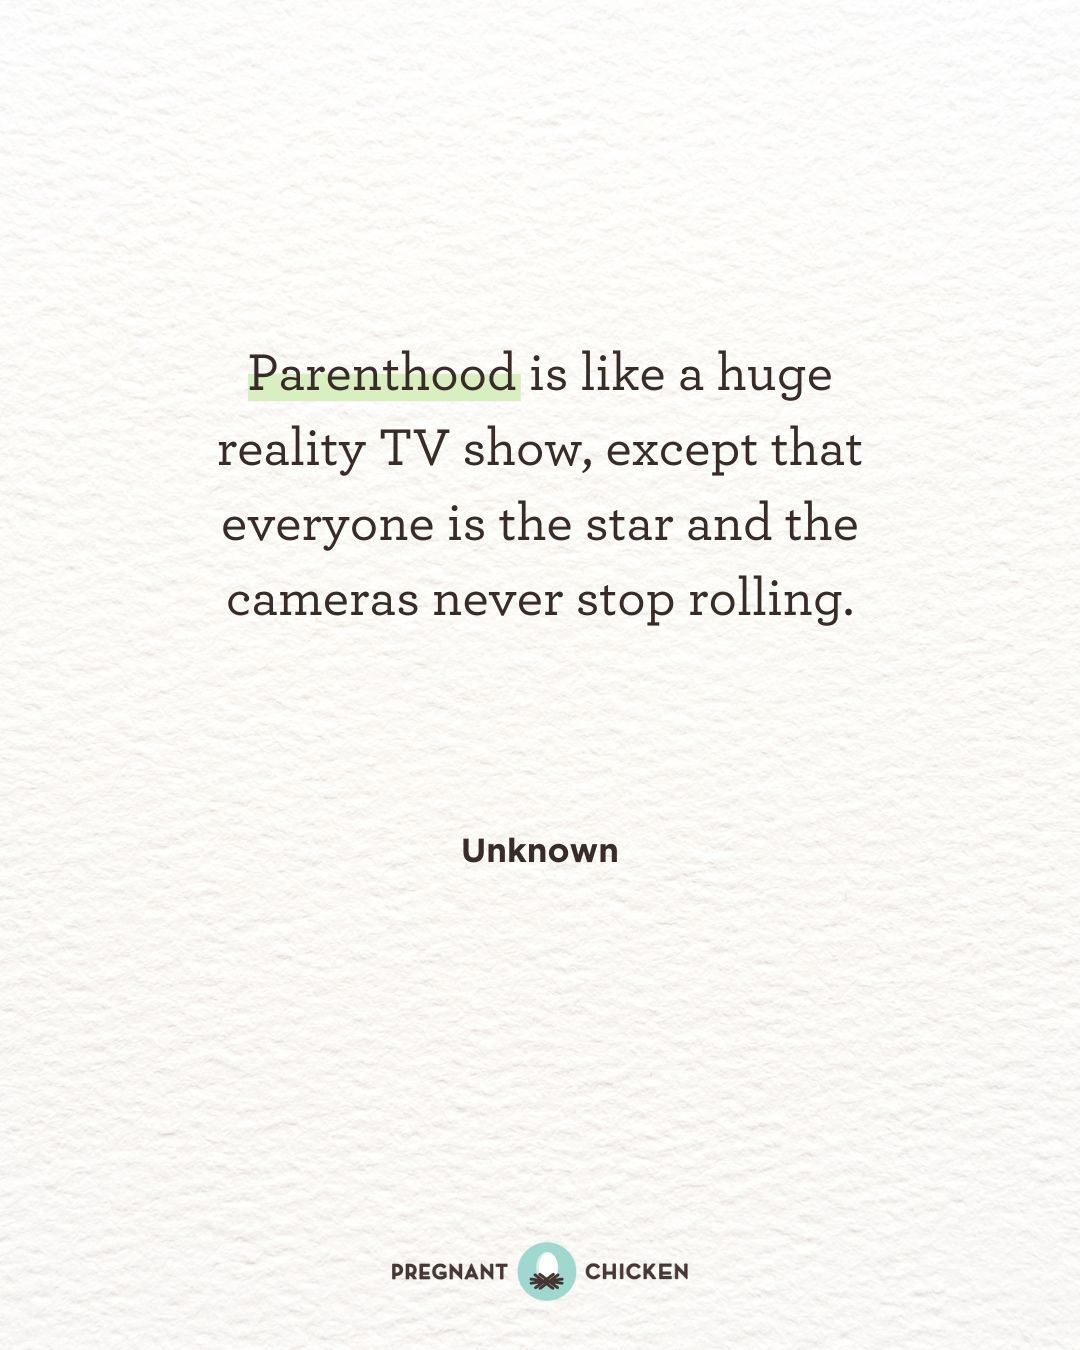 Parenthood is like a huge reality TV show, except that everyone is the star and the cameras never stop rolling.